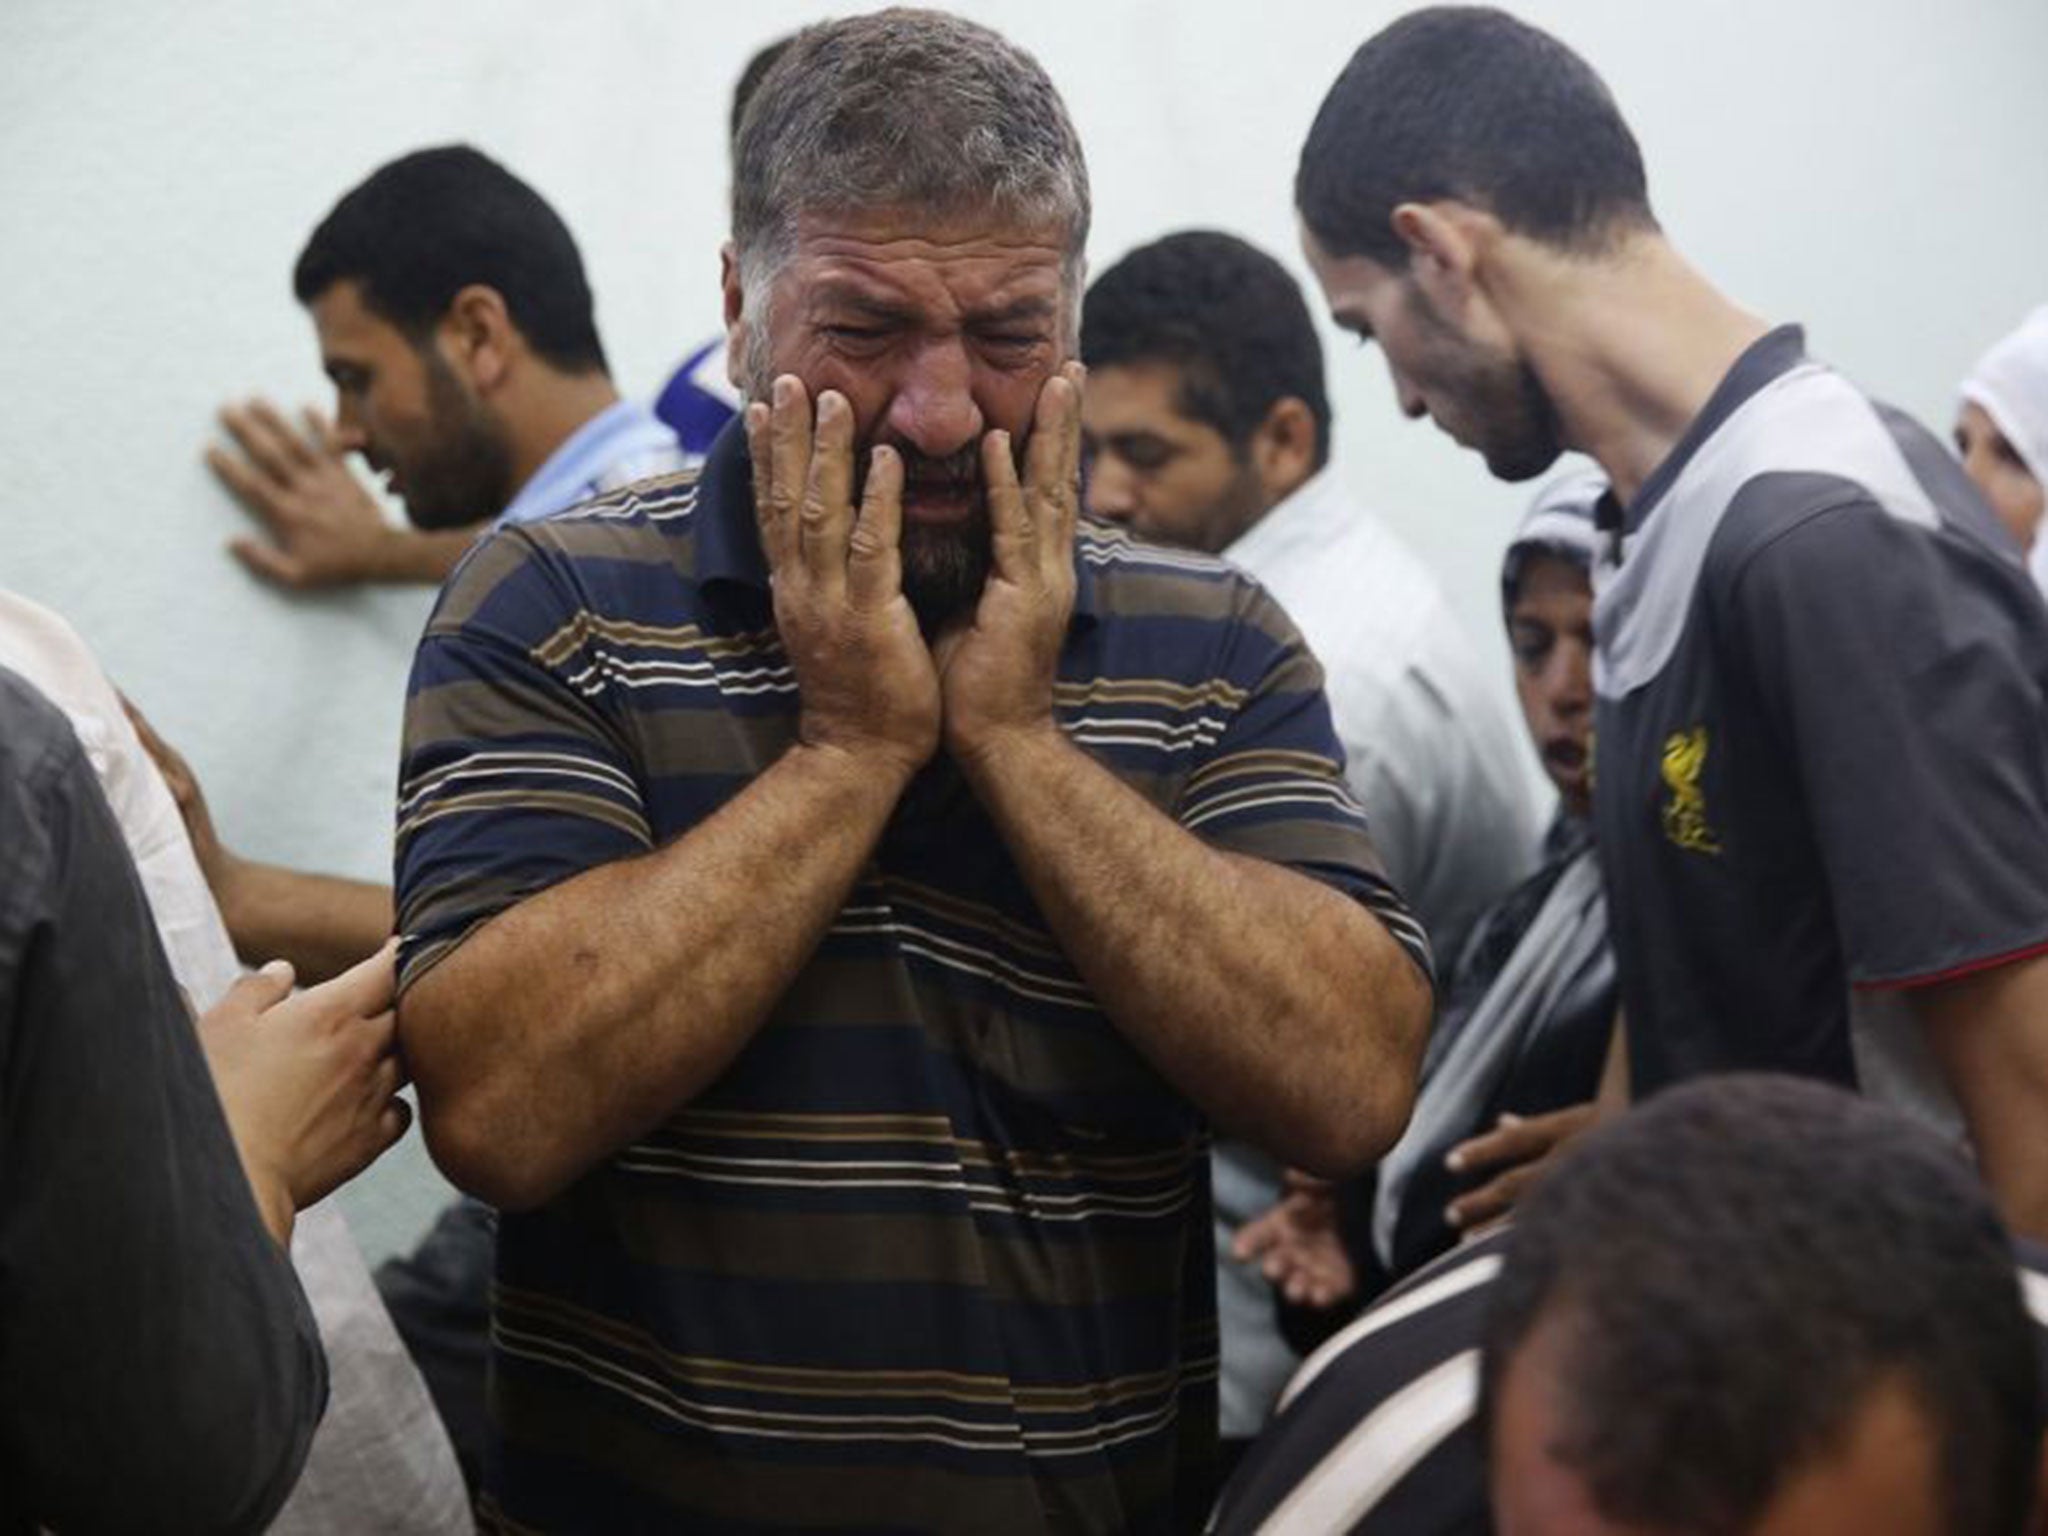 A Palestinian man mourns a relative who medics said died in Israeli shelling during the Israeli ground offensive